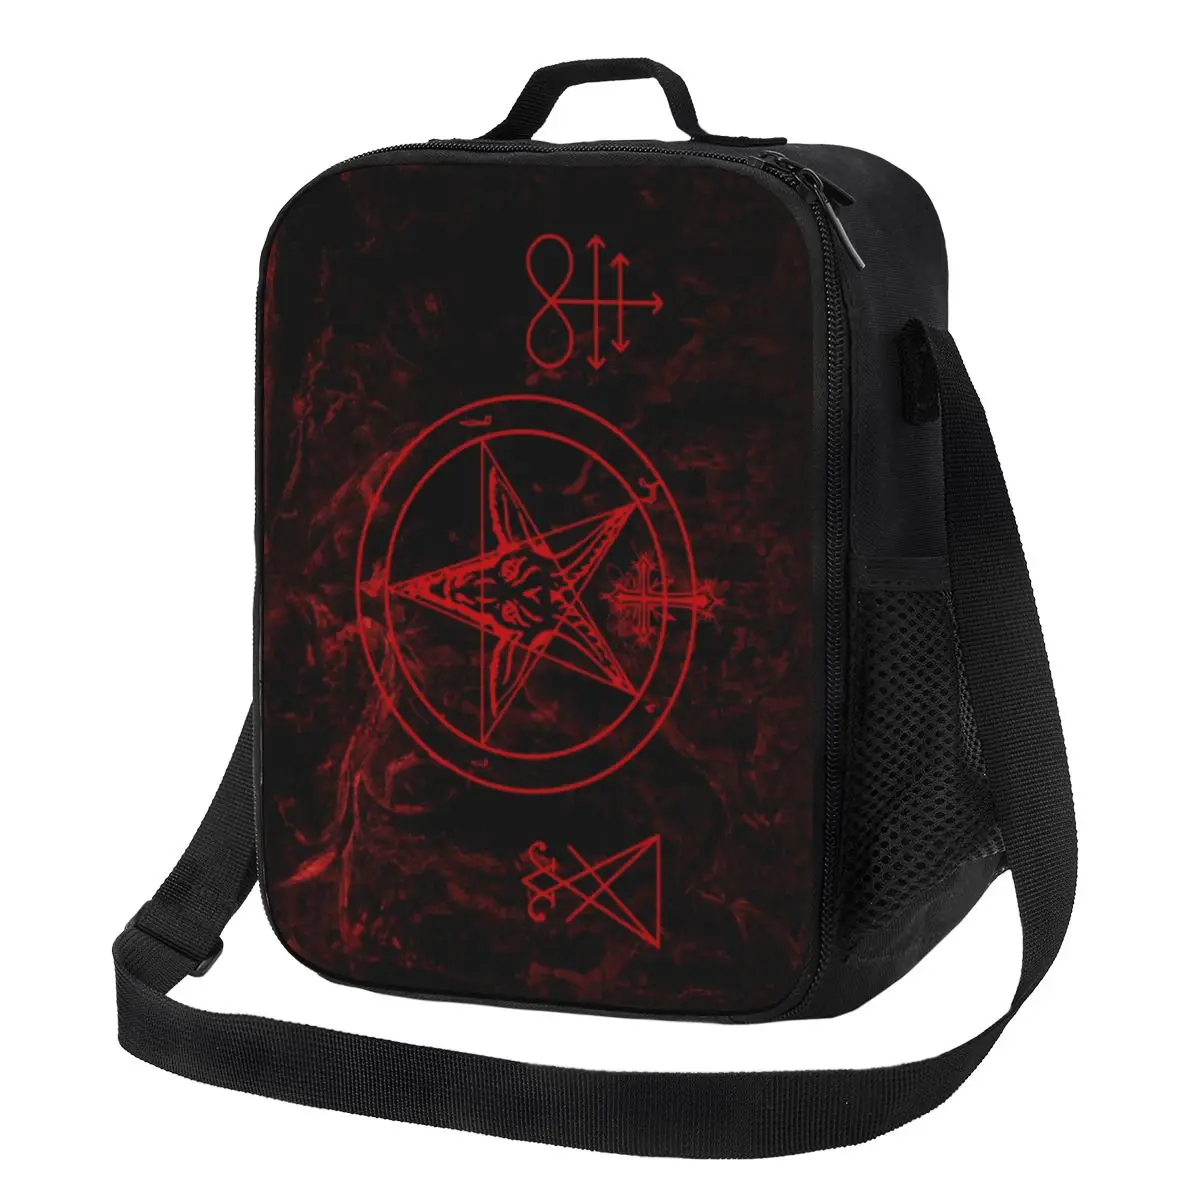 

Baphomet Leviathan Cross Insulated Lunch Bag for Camping Travel Devil Satanic Resuable Cooler Thermal Bento Box Women Kids